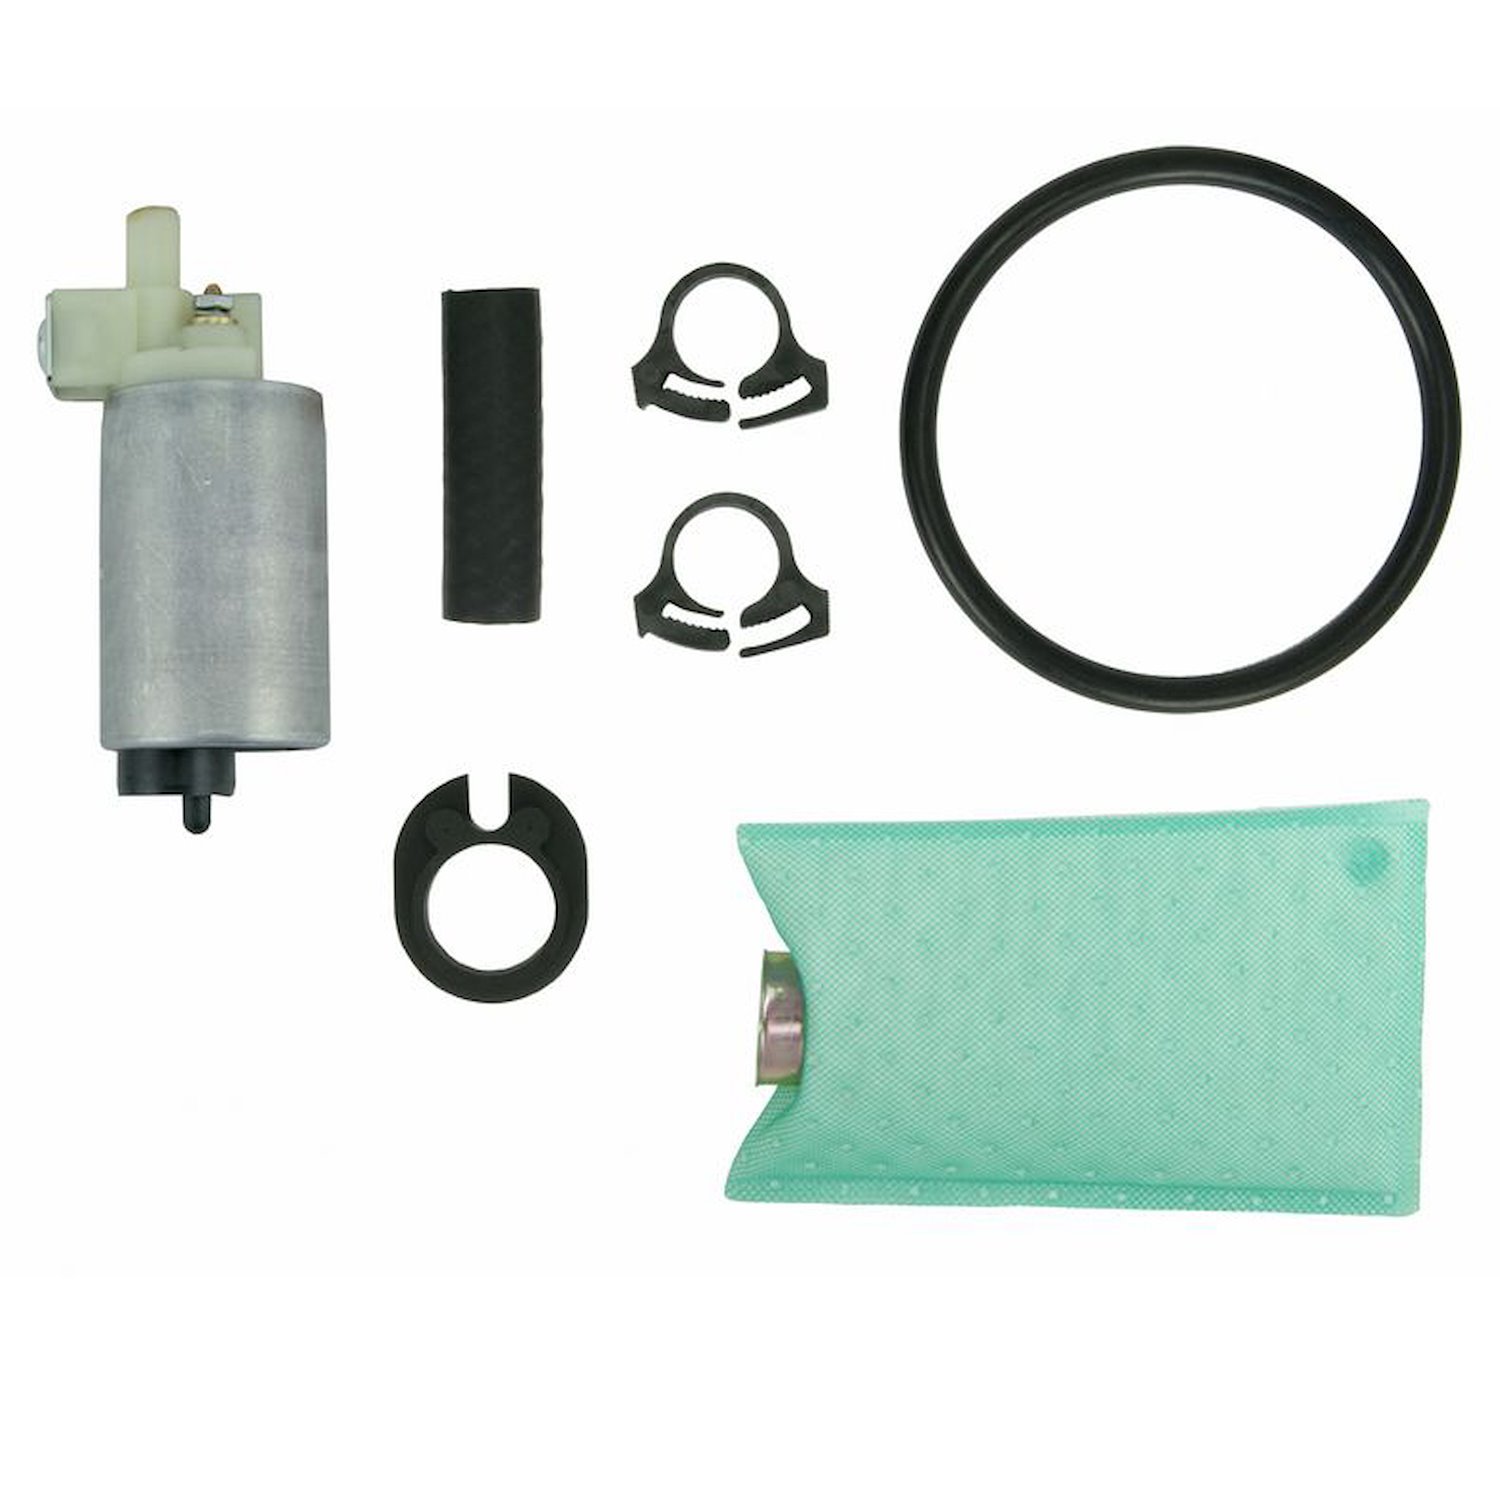 EFI In-Tank Electric Fuel Pump And Strainer Set for 1975-1980 Buick Skyhawk/Chevy Monza/Oldsmobile Starfire